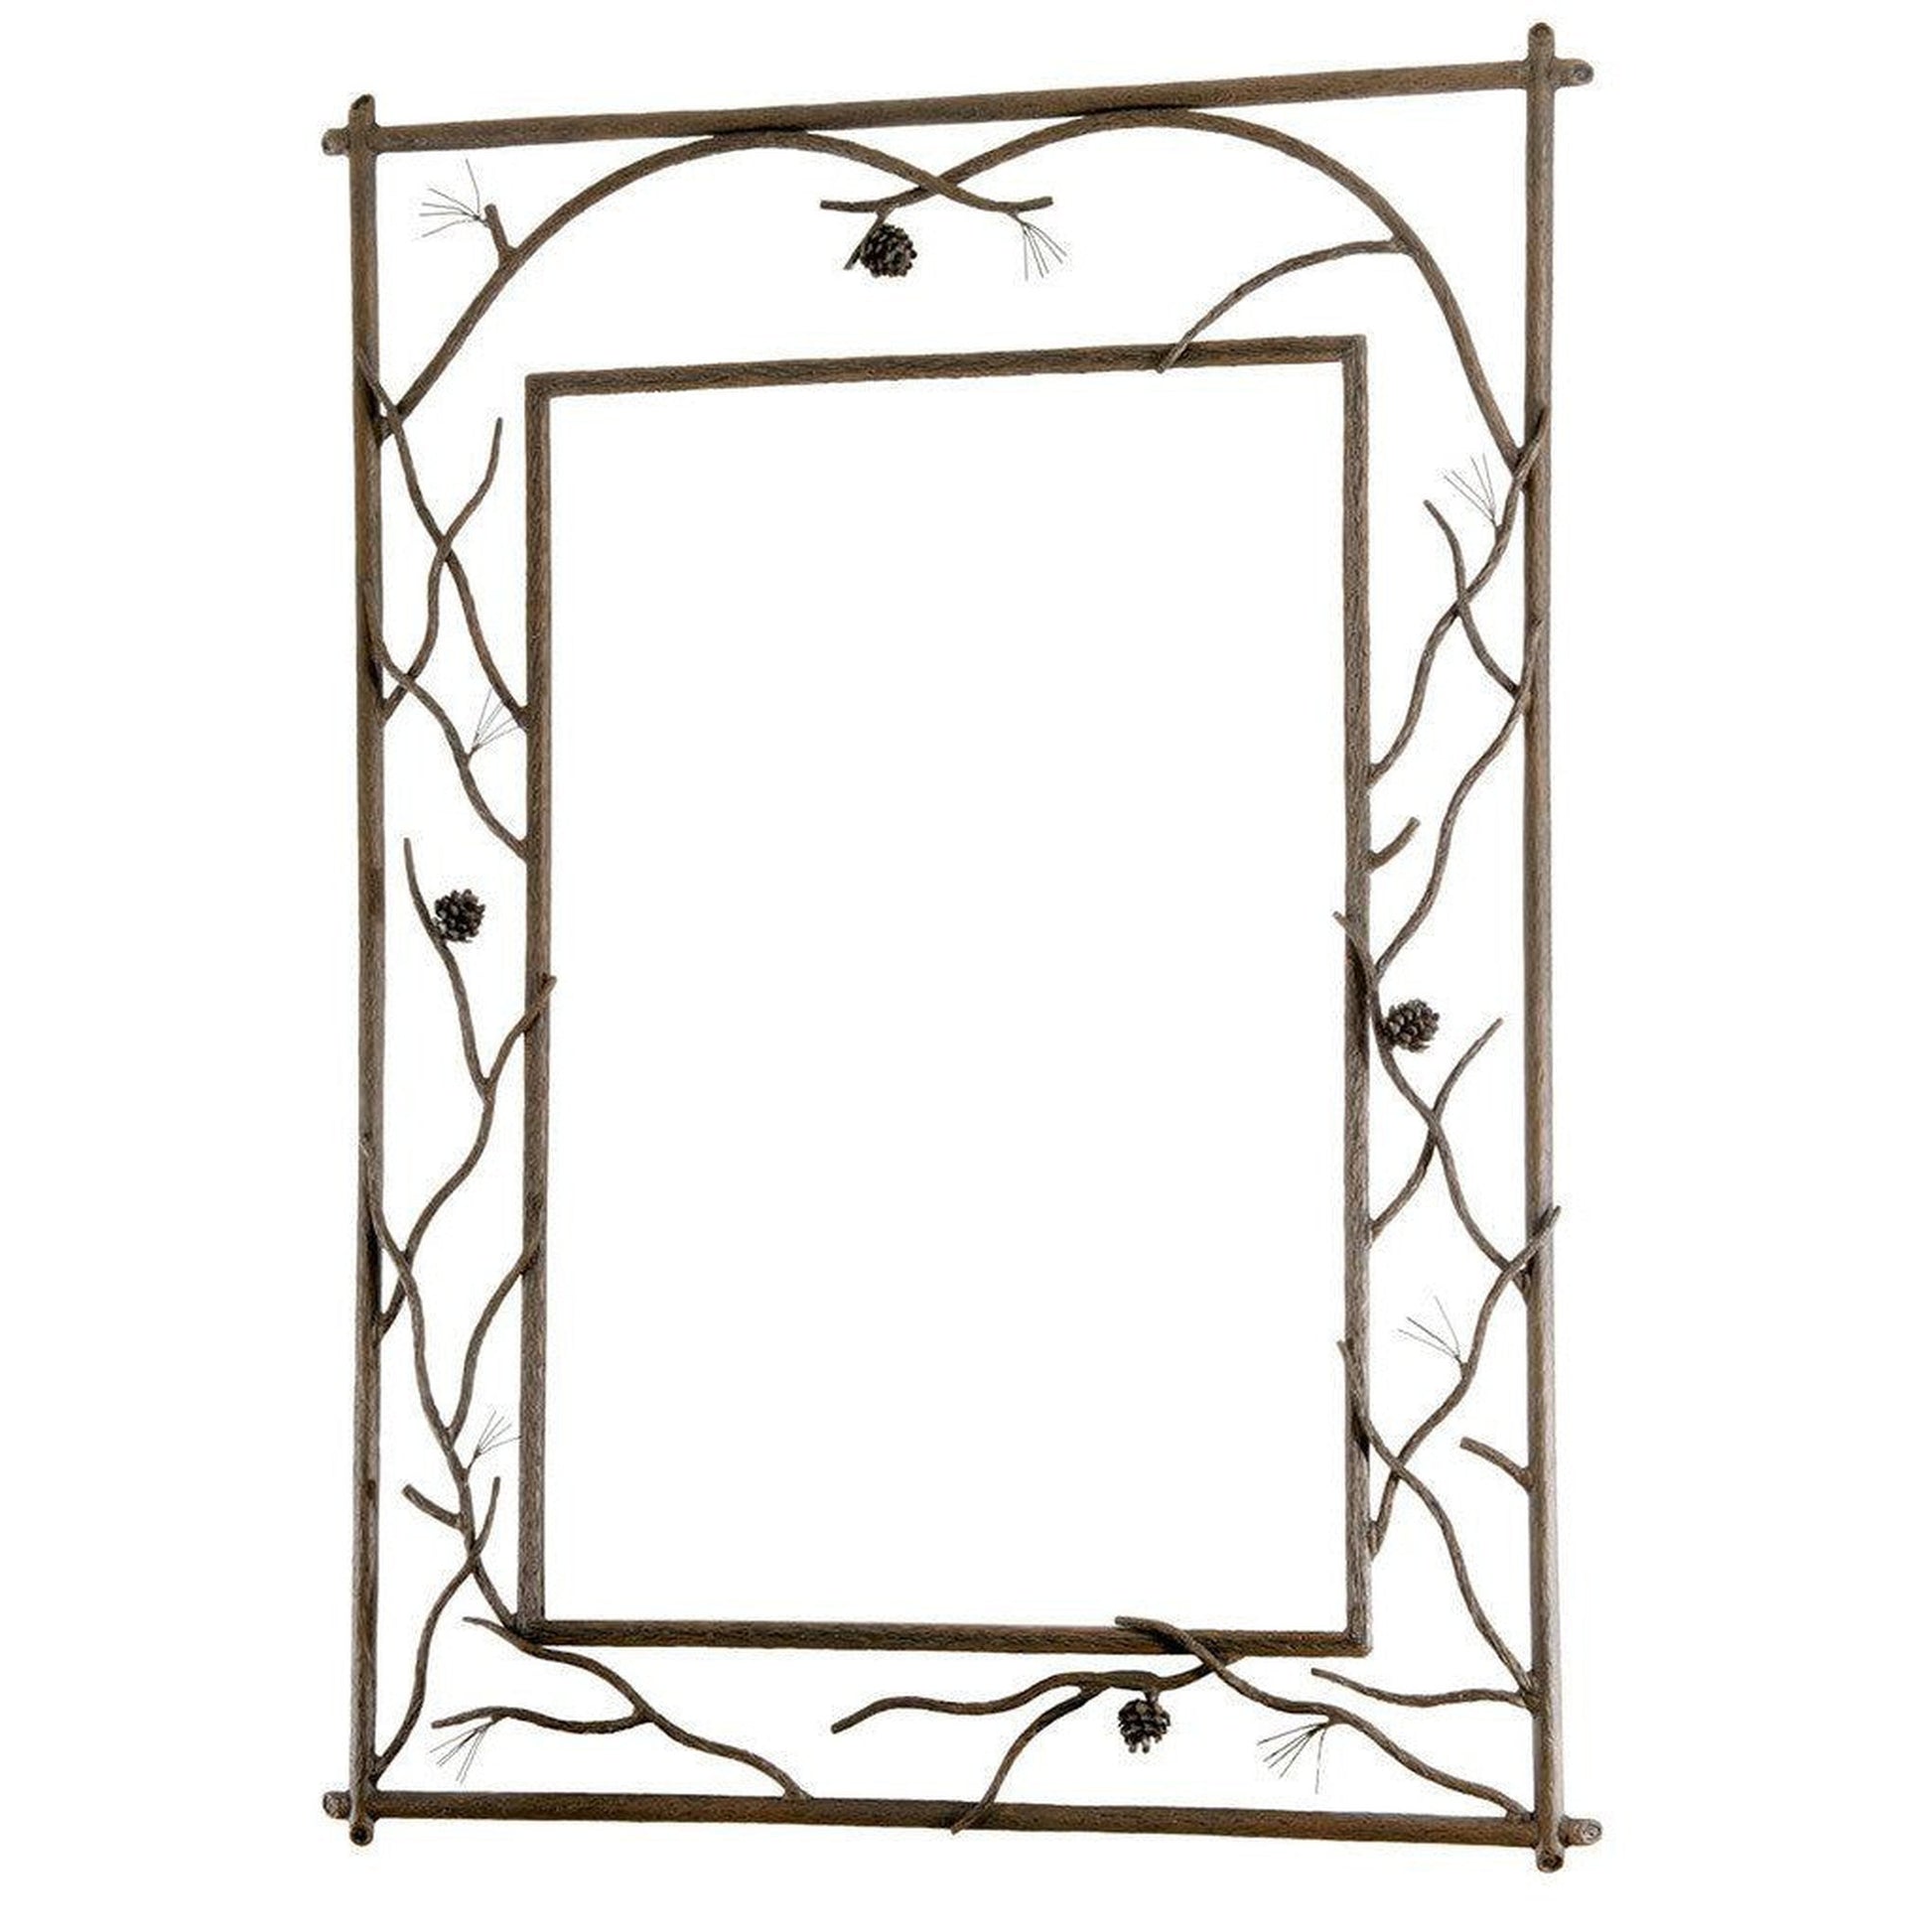 Stone County Ironworks Pine 29" x 35" Small Hand Rubbed Brass Branched Iron Wall Mirror